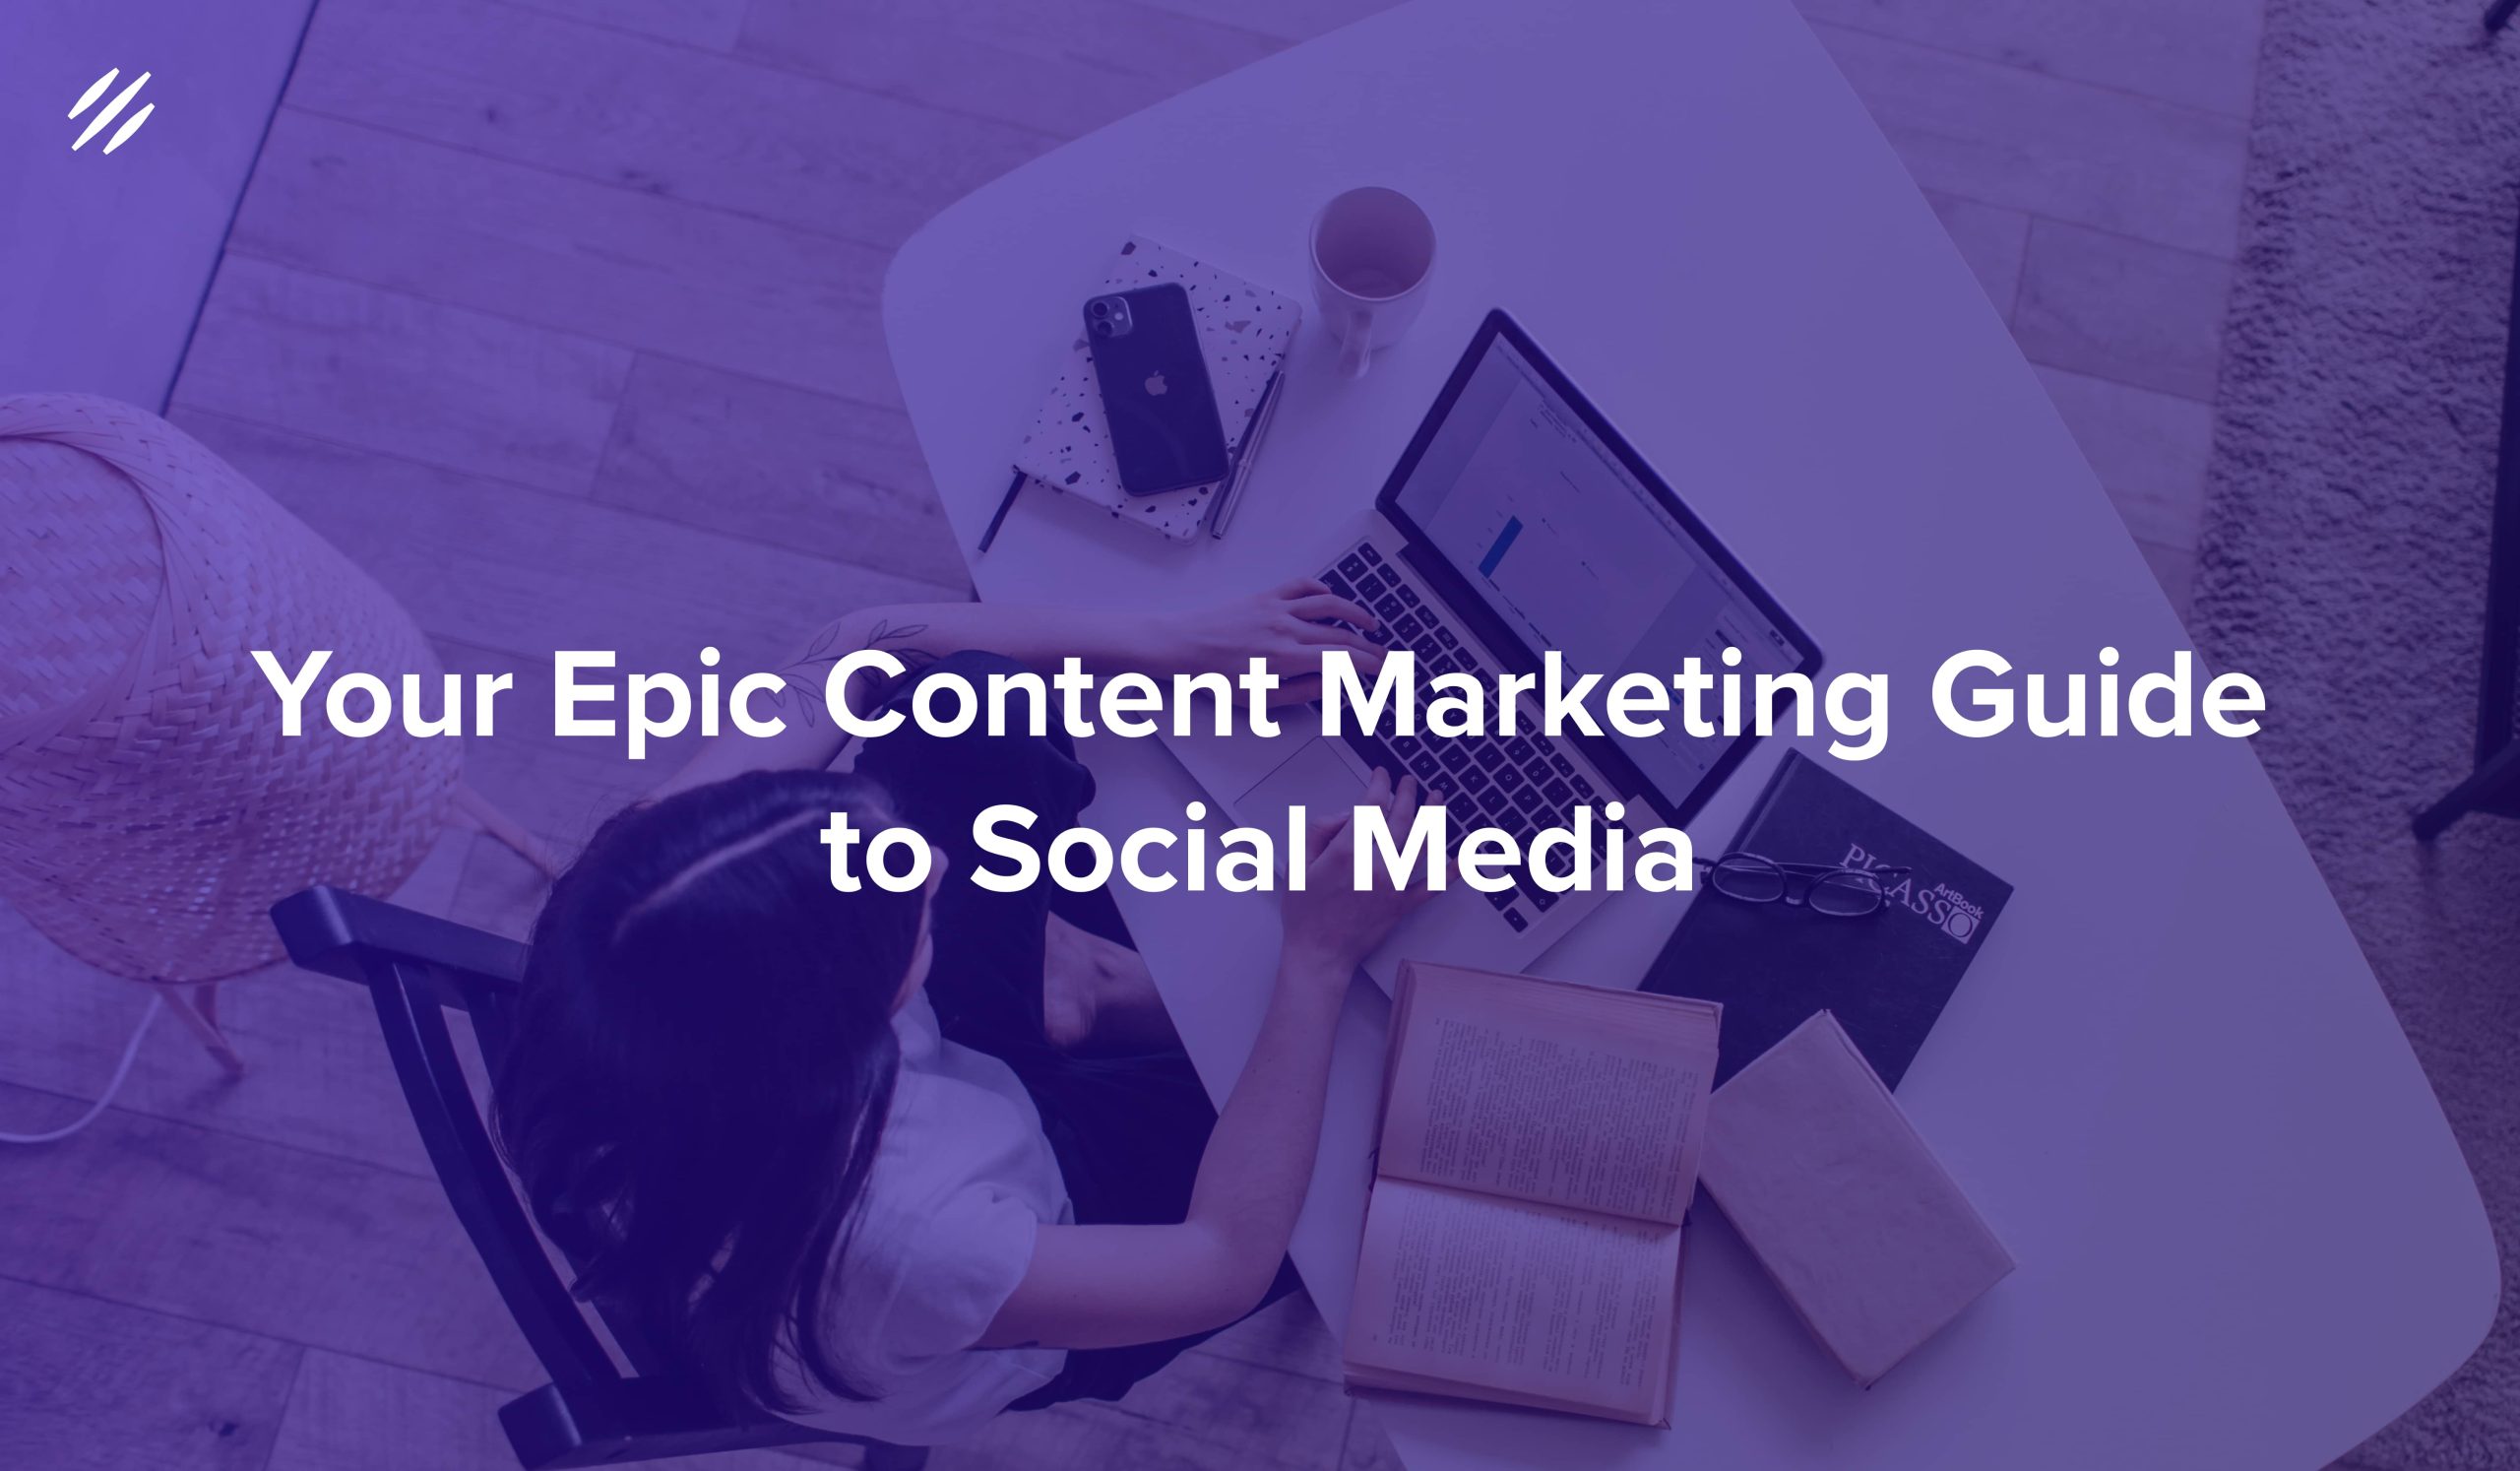 Your Epic Content Marketing Guide to Social Media